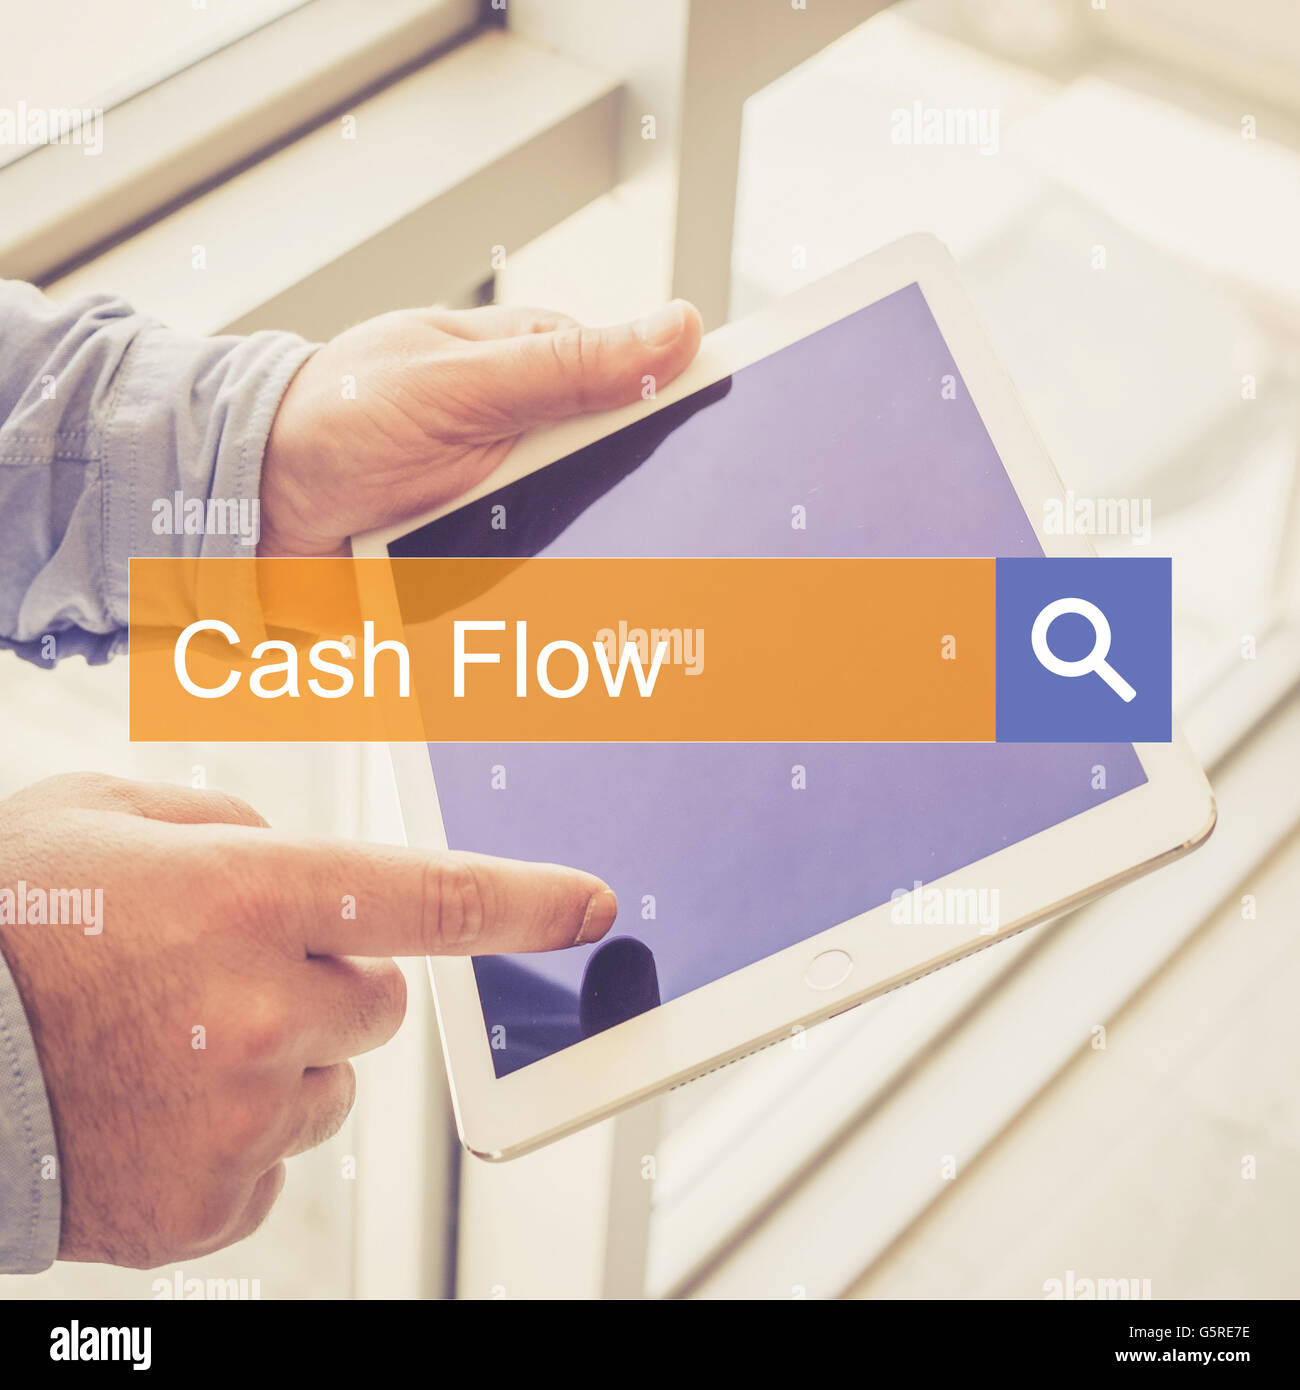 SEARCH TECHNOLOGY COMMUNICATION  Cash Flow TABLET FINDING CONCEPT Stock Photo